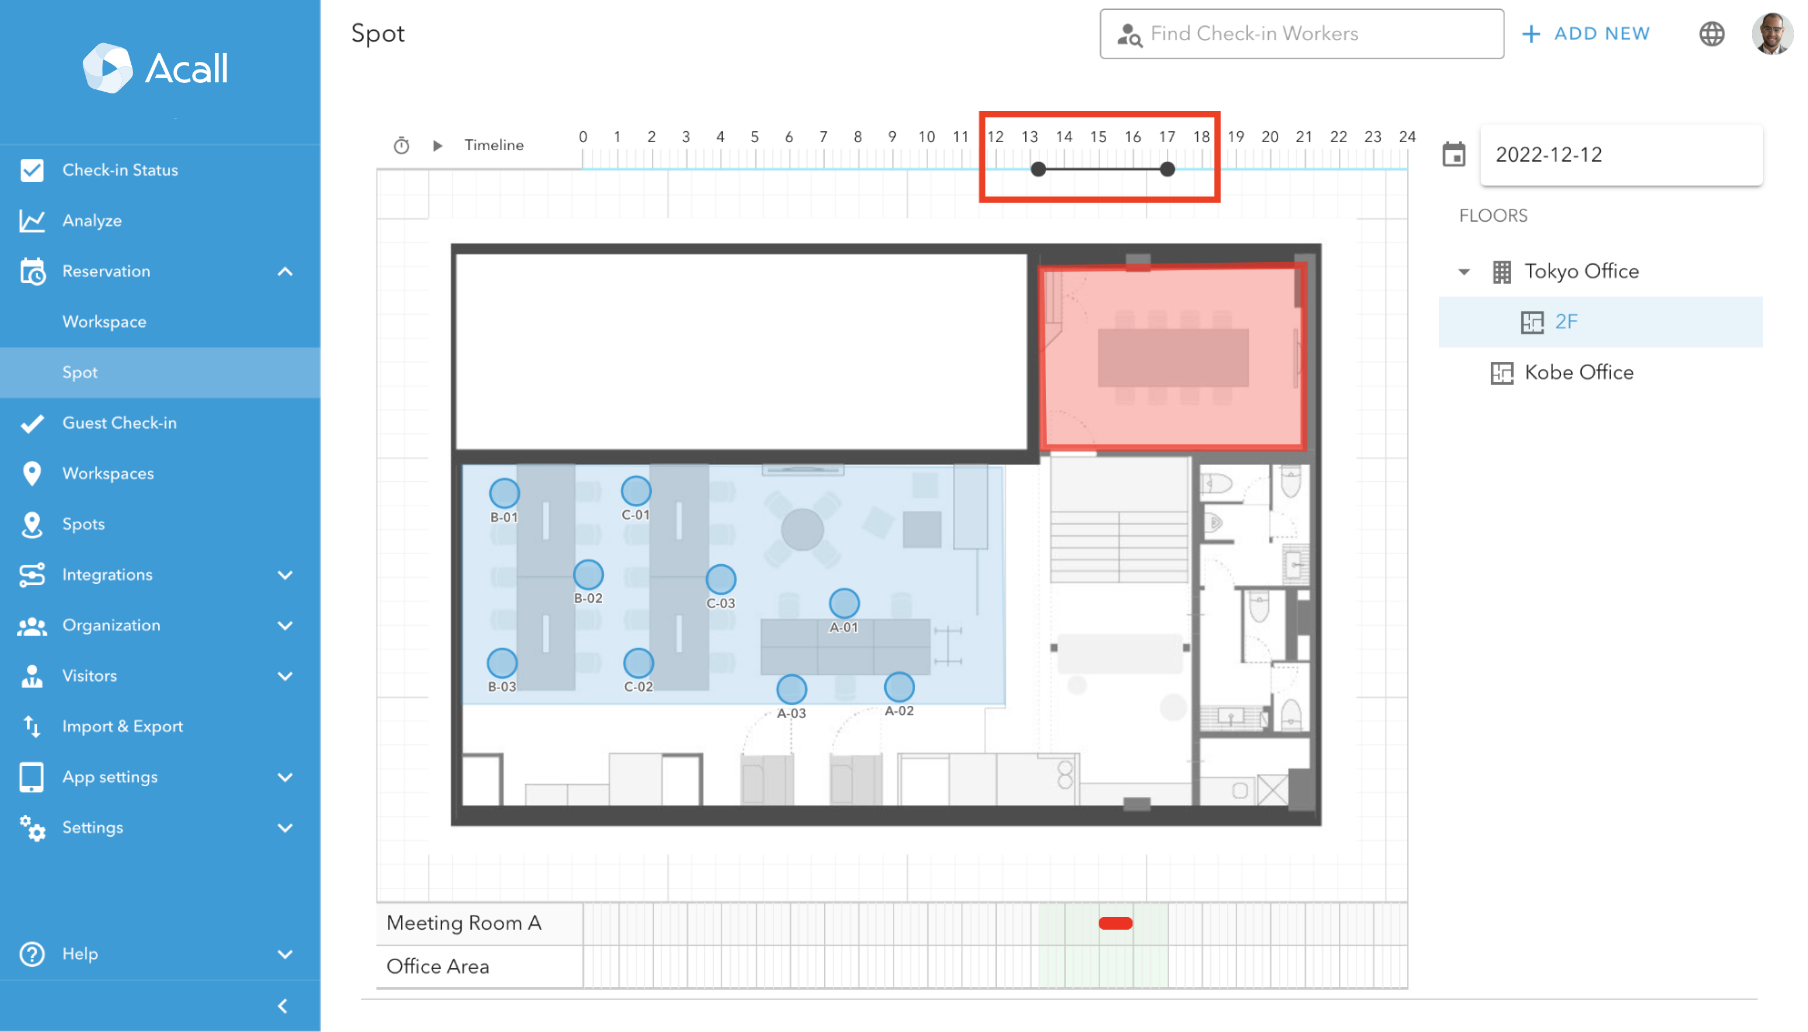 Reserve Your Spot on Floor Map on Acall Portal5.png